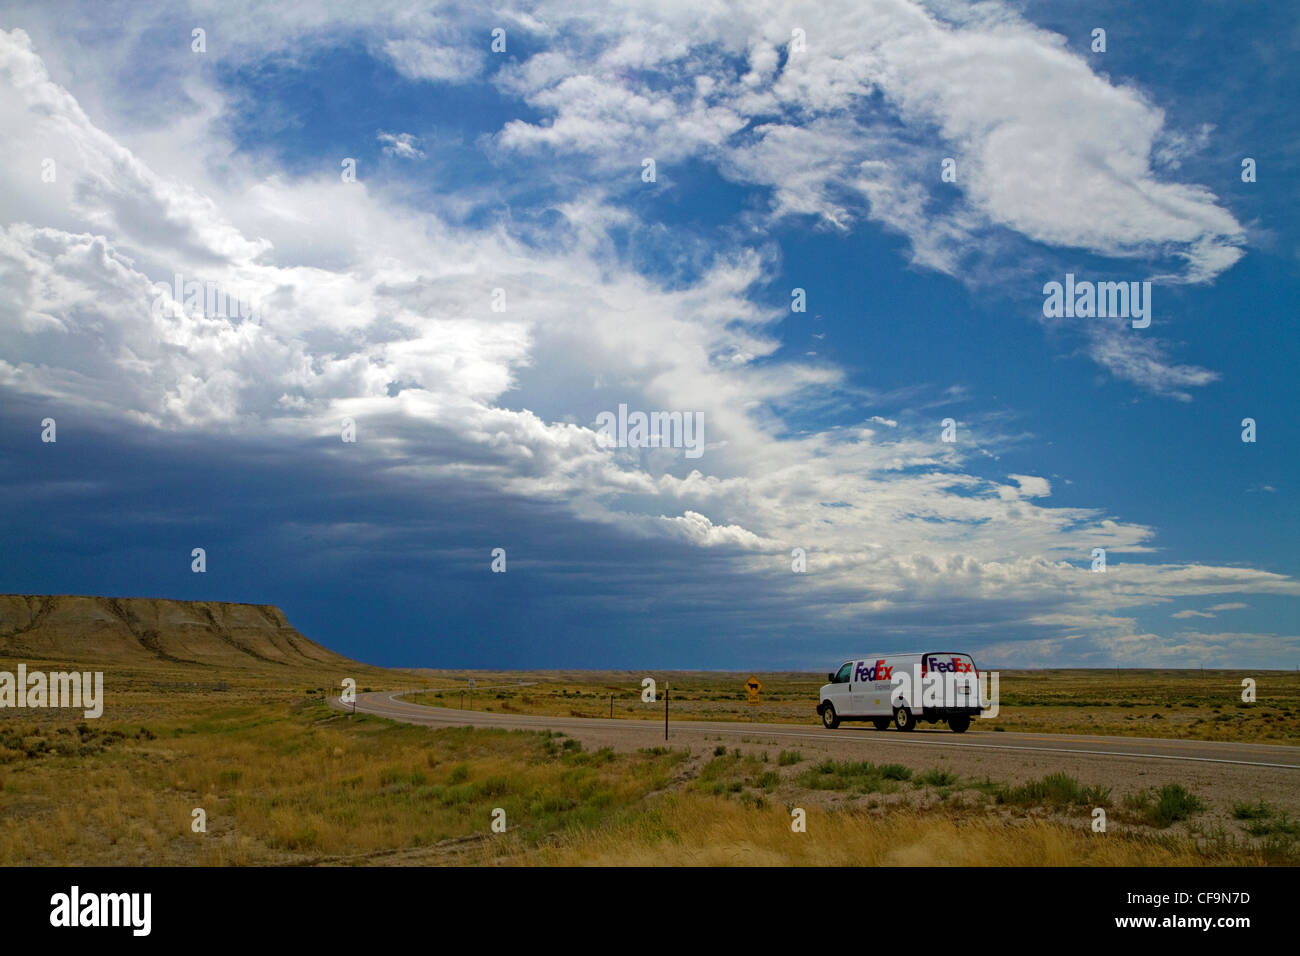 Storm clouds and highway near Green River, Wyoming, USA. Stock Photo